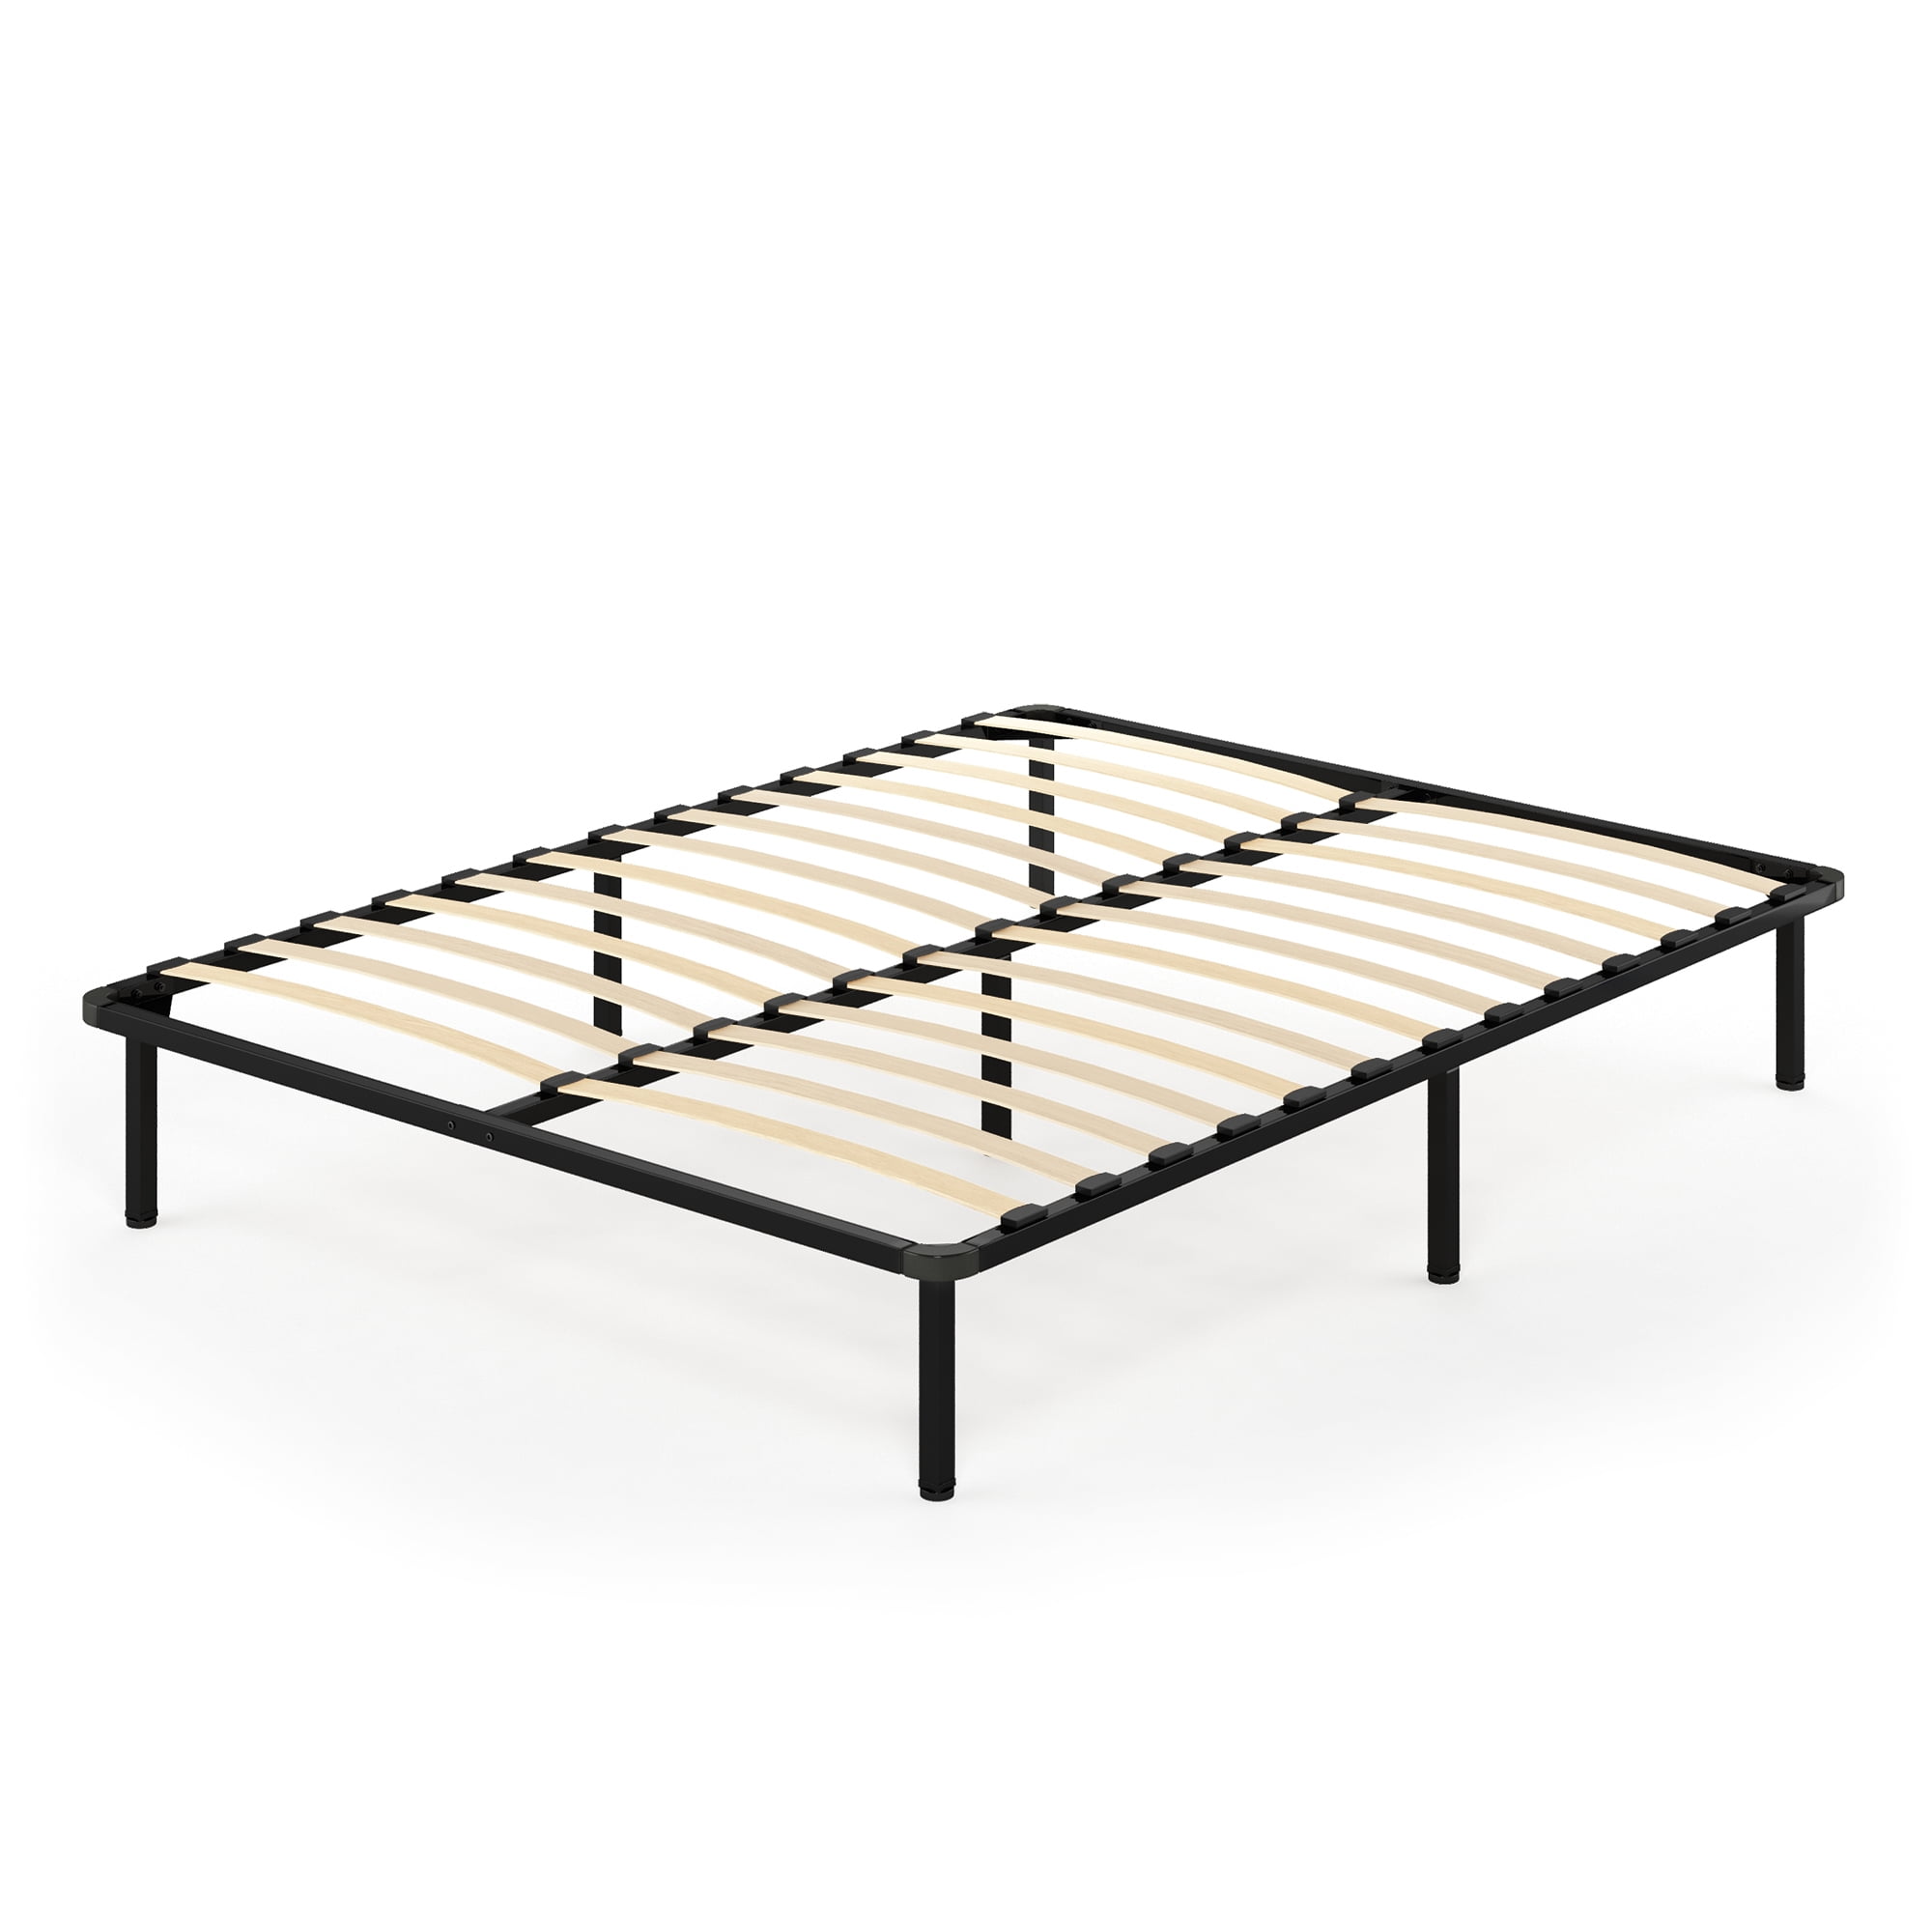 Details about   TATAGO Full/Queen/King 3500lbs Heavy Duty Wood Salts Support Platform Bed Frame 